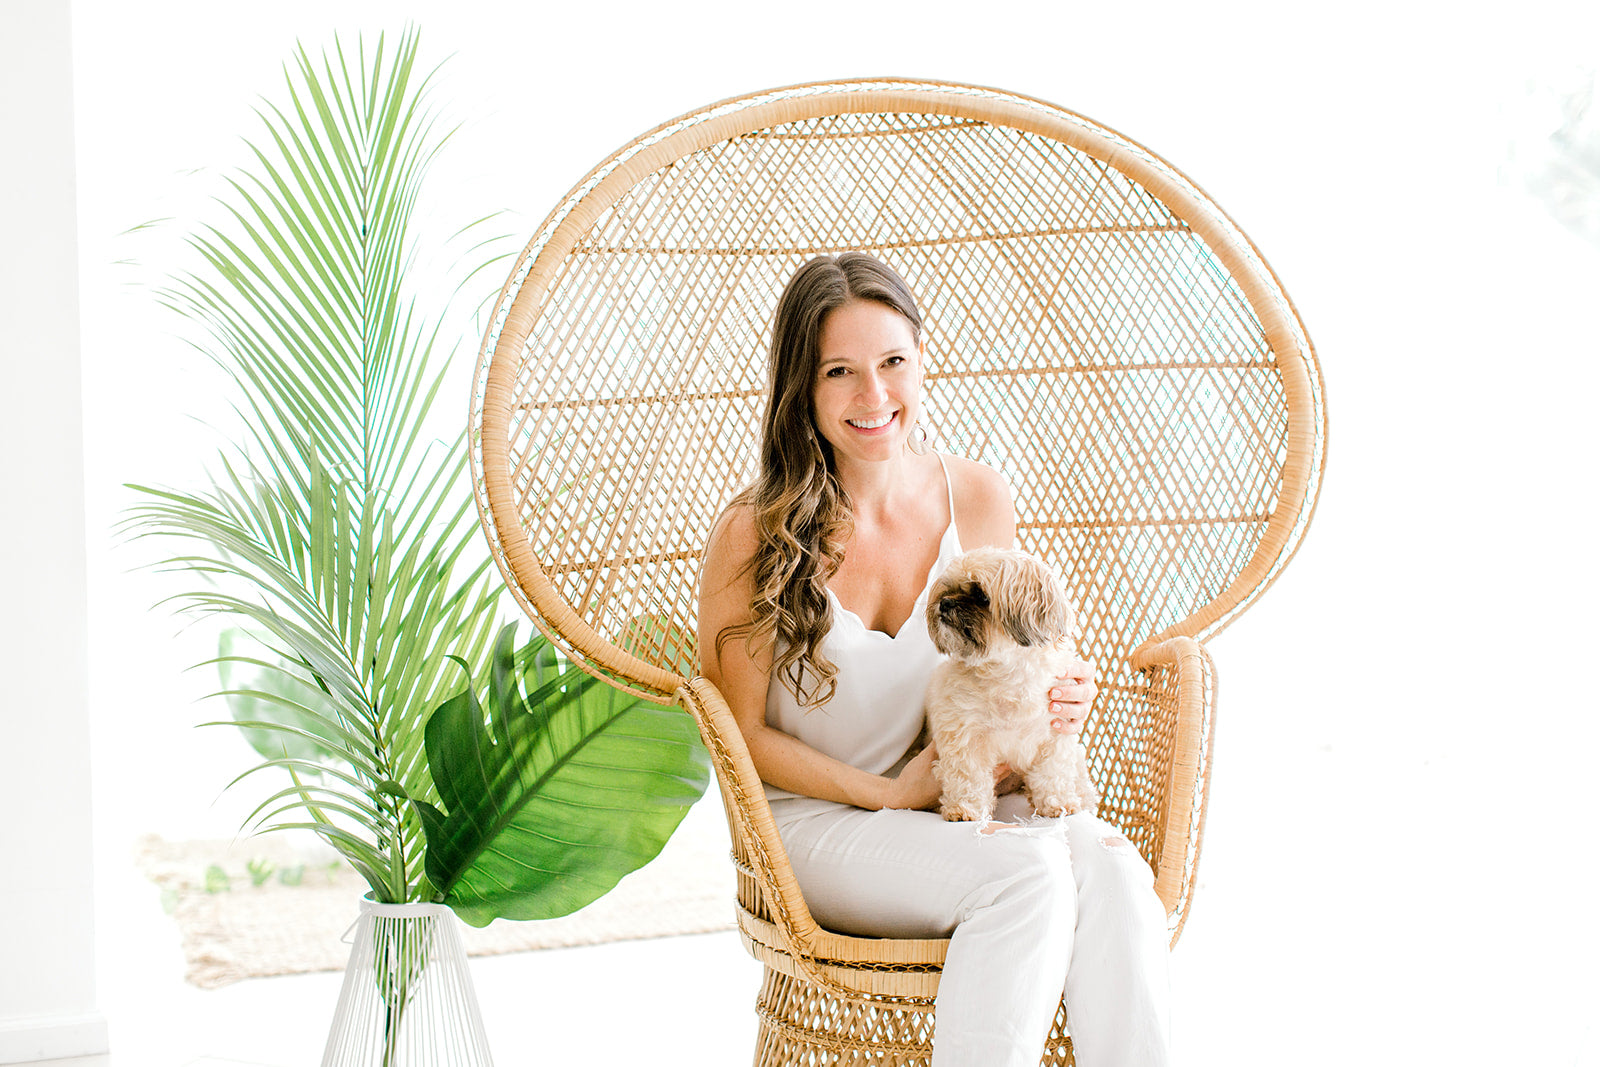 Jaime, owner of Champagne & GRIT smiling while sitting in a wicker chair with her dog on her lap